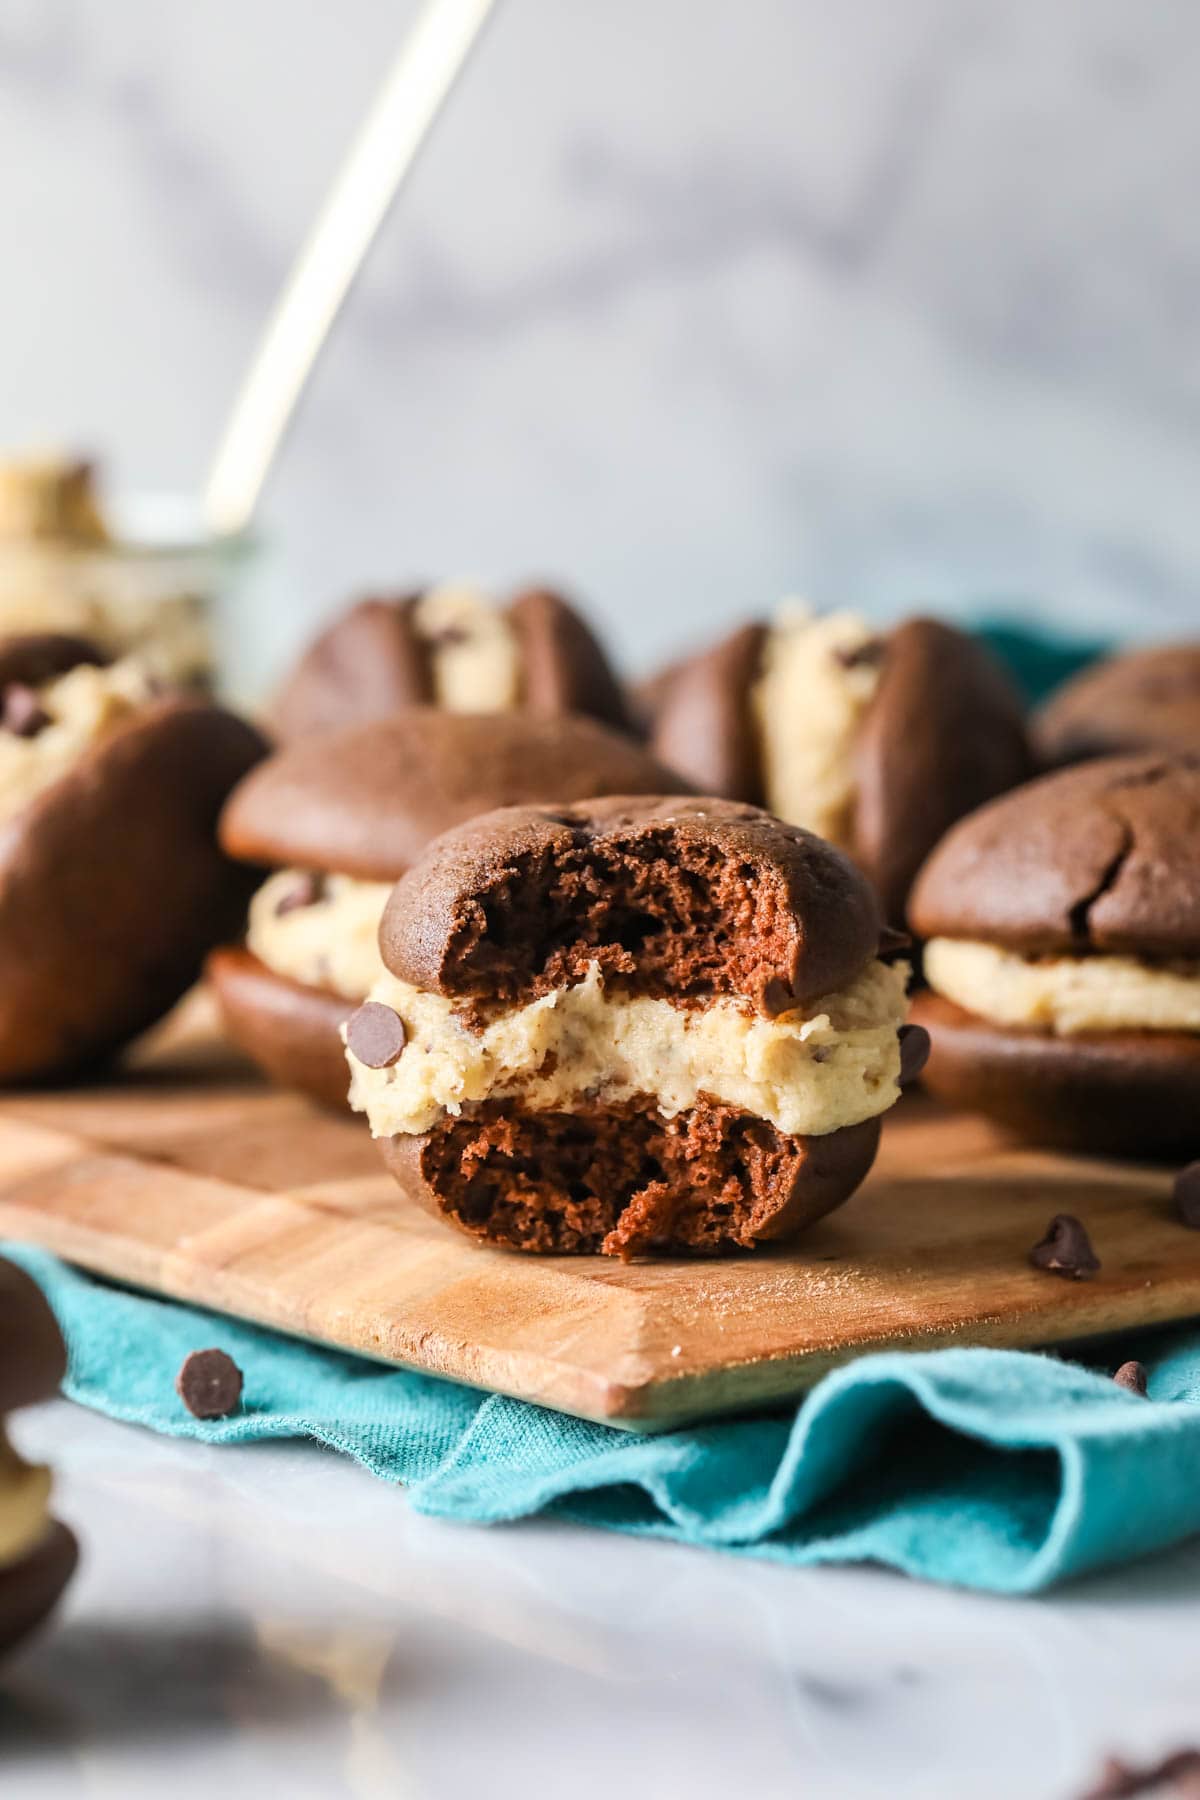 Chocolate whoopie pie with a cookie dough filling missing one bite.